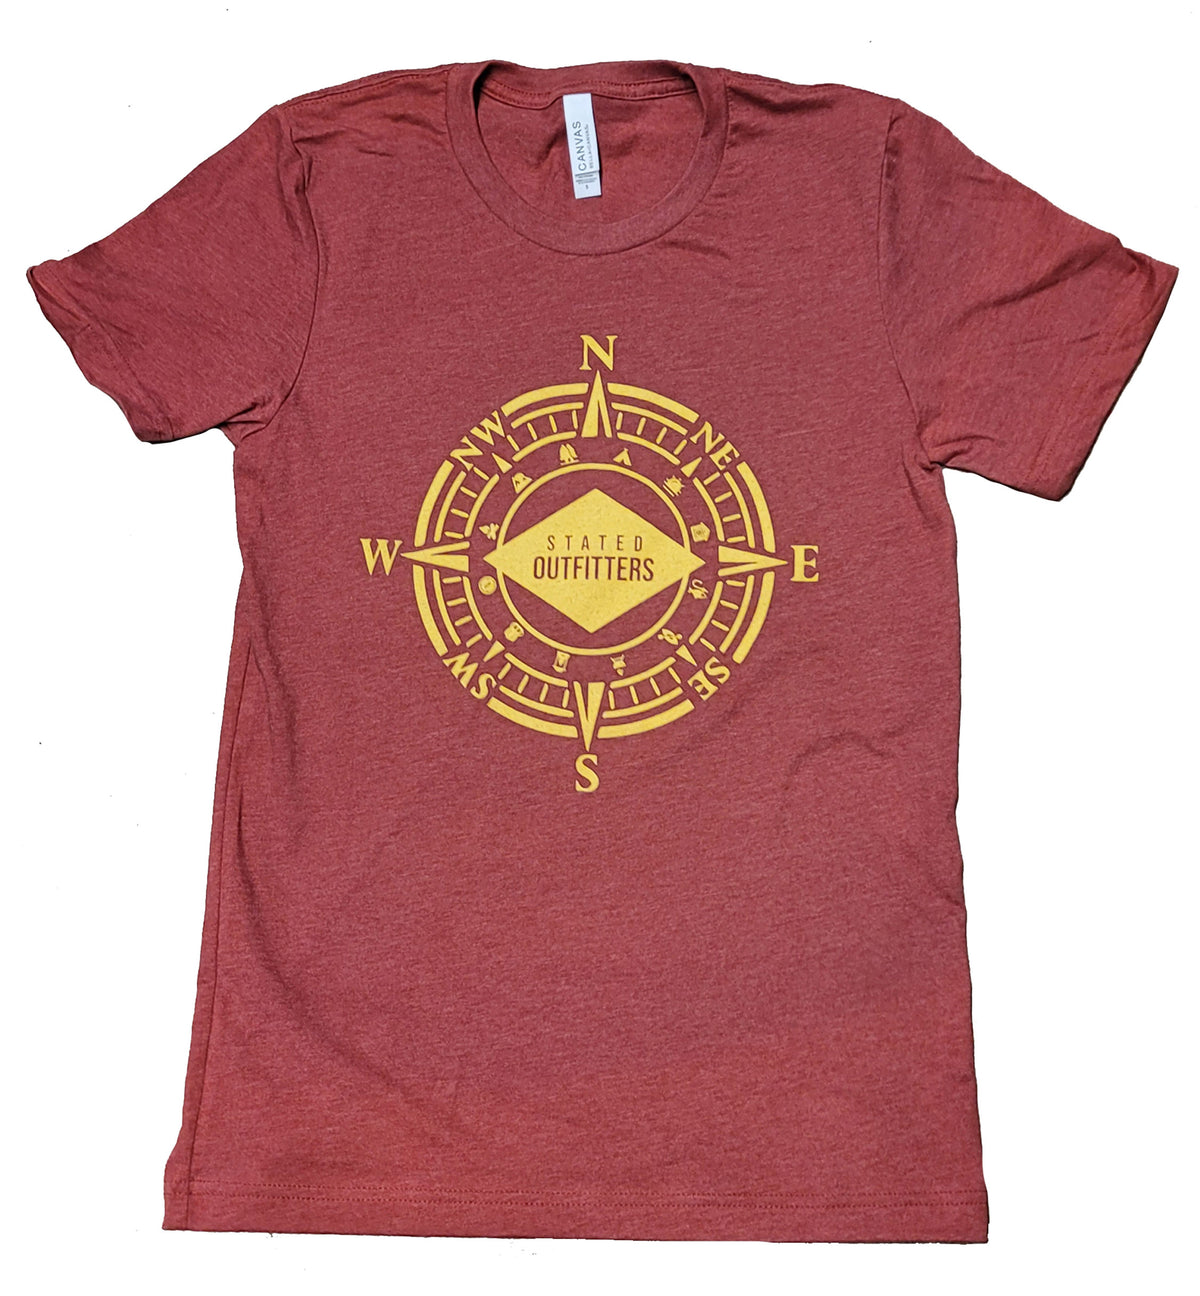 Stated Outfitters Compass Tee